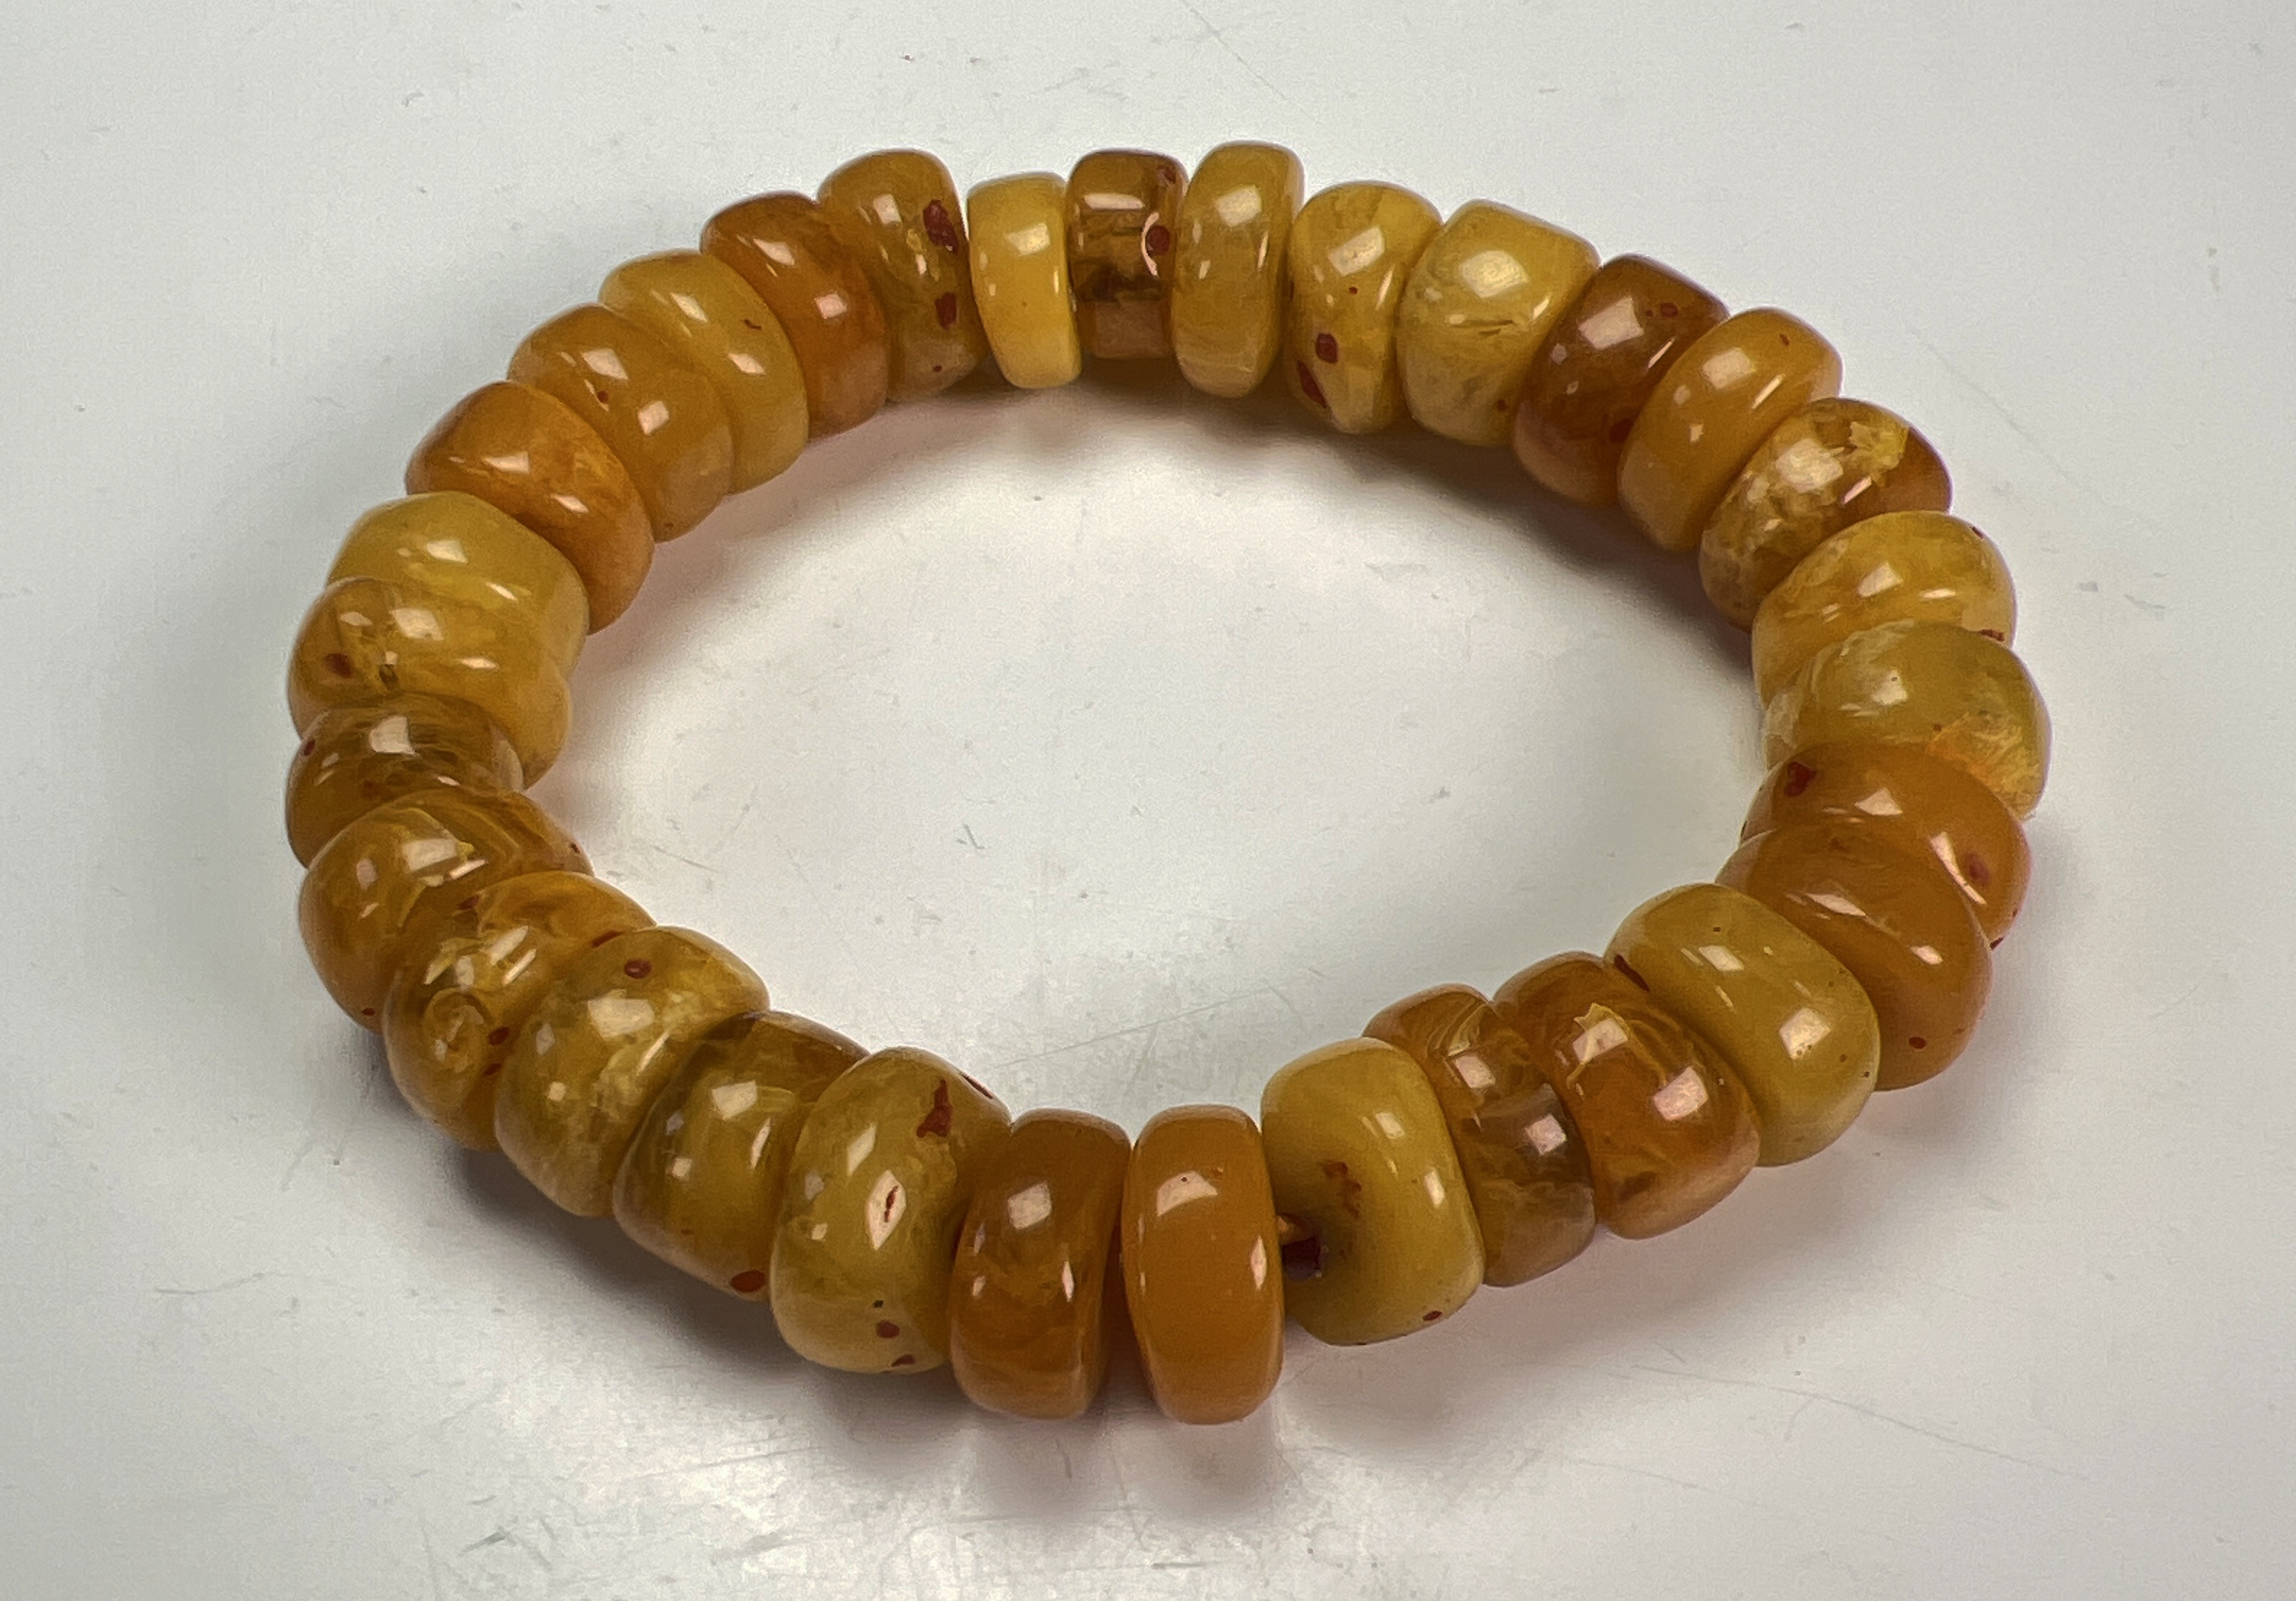 Exquisite Amber-Colored Chinese Bracelet - Timeless Elegance image 1